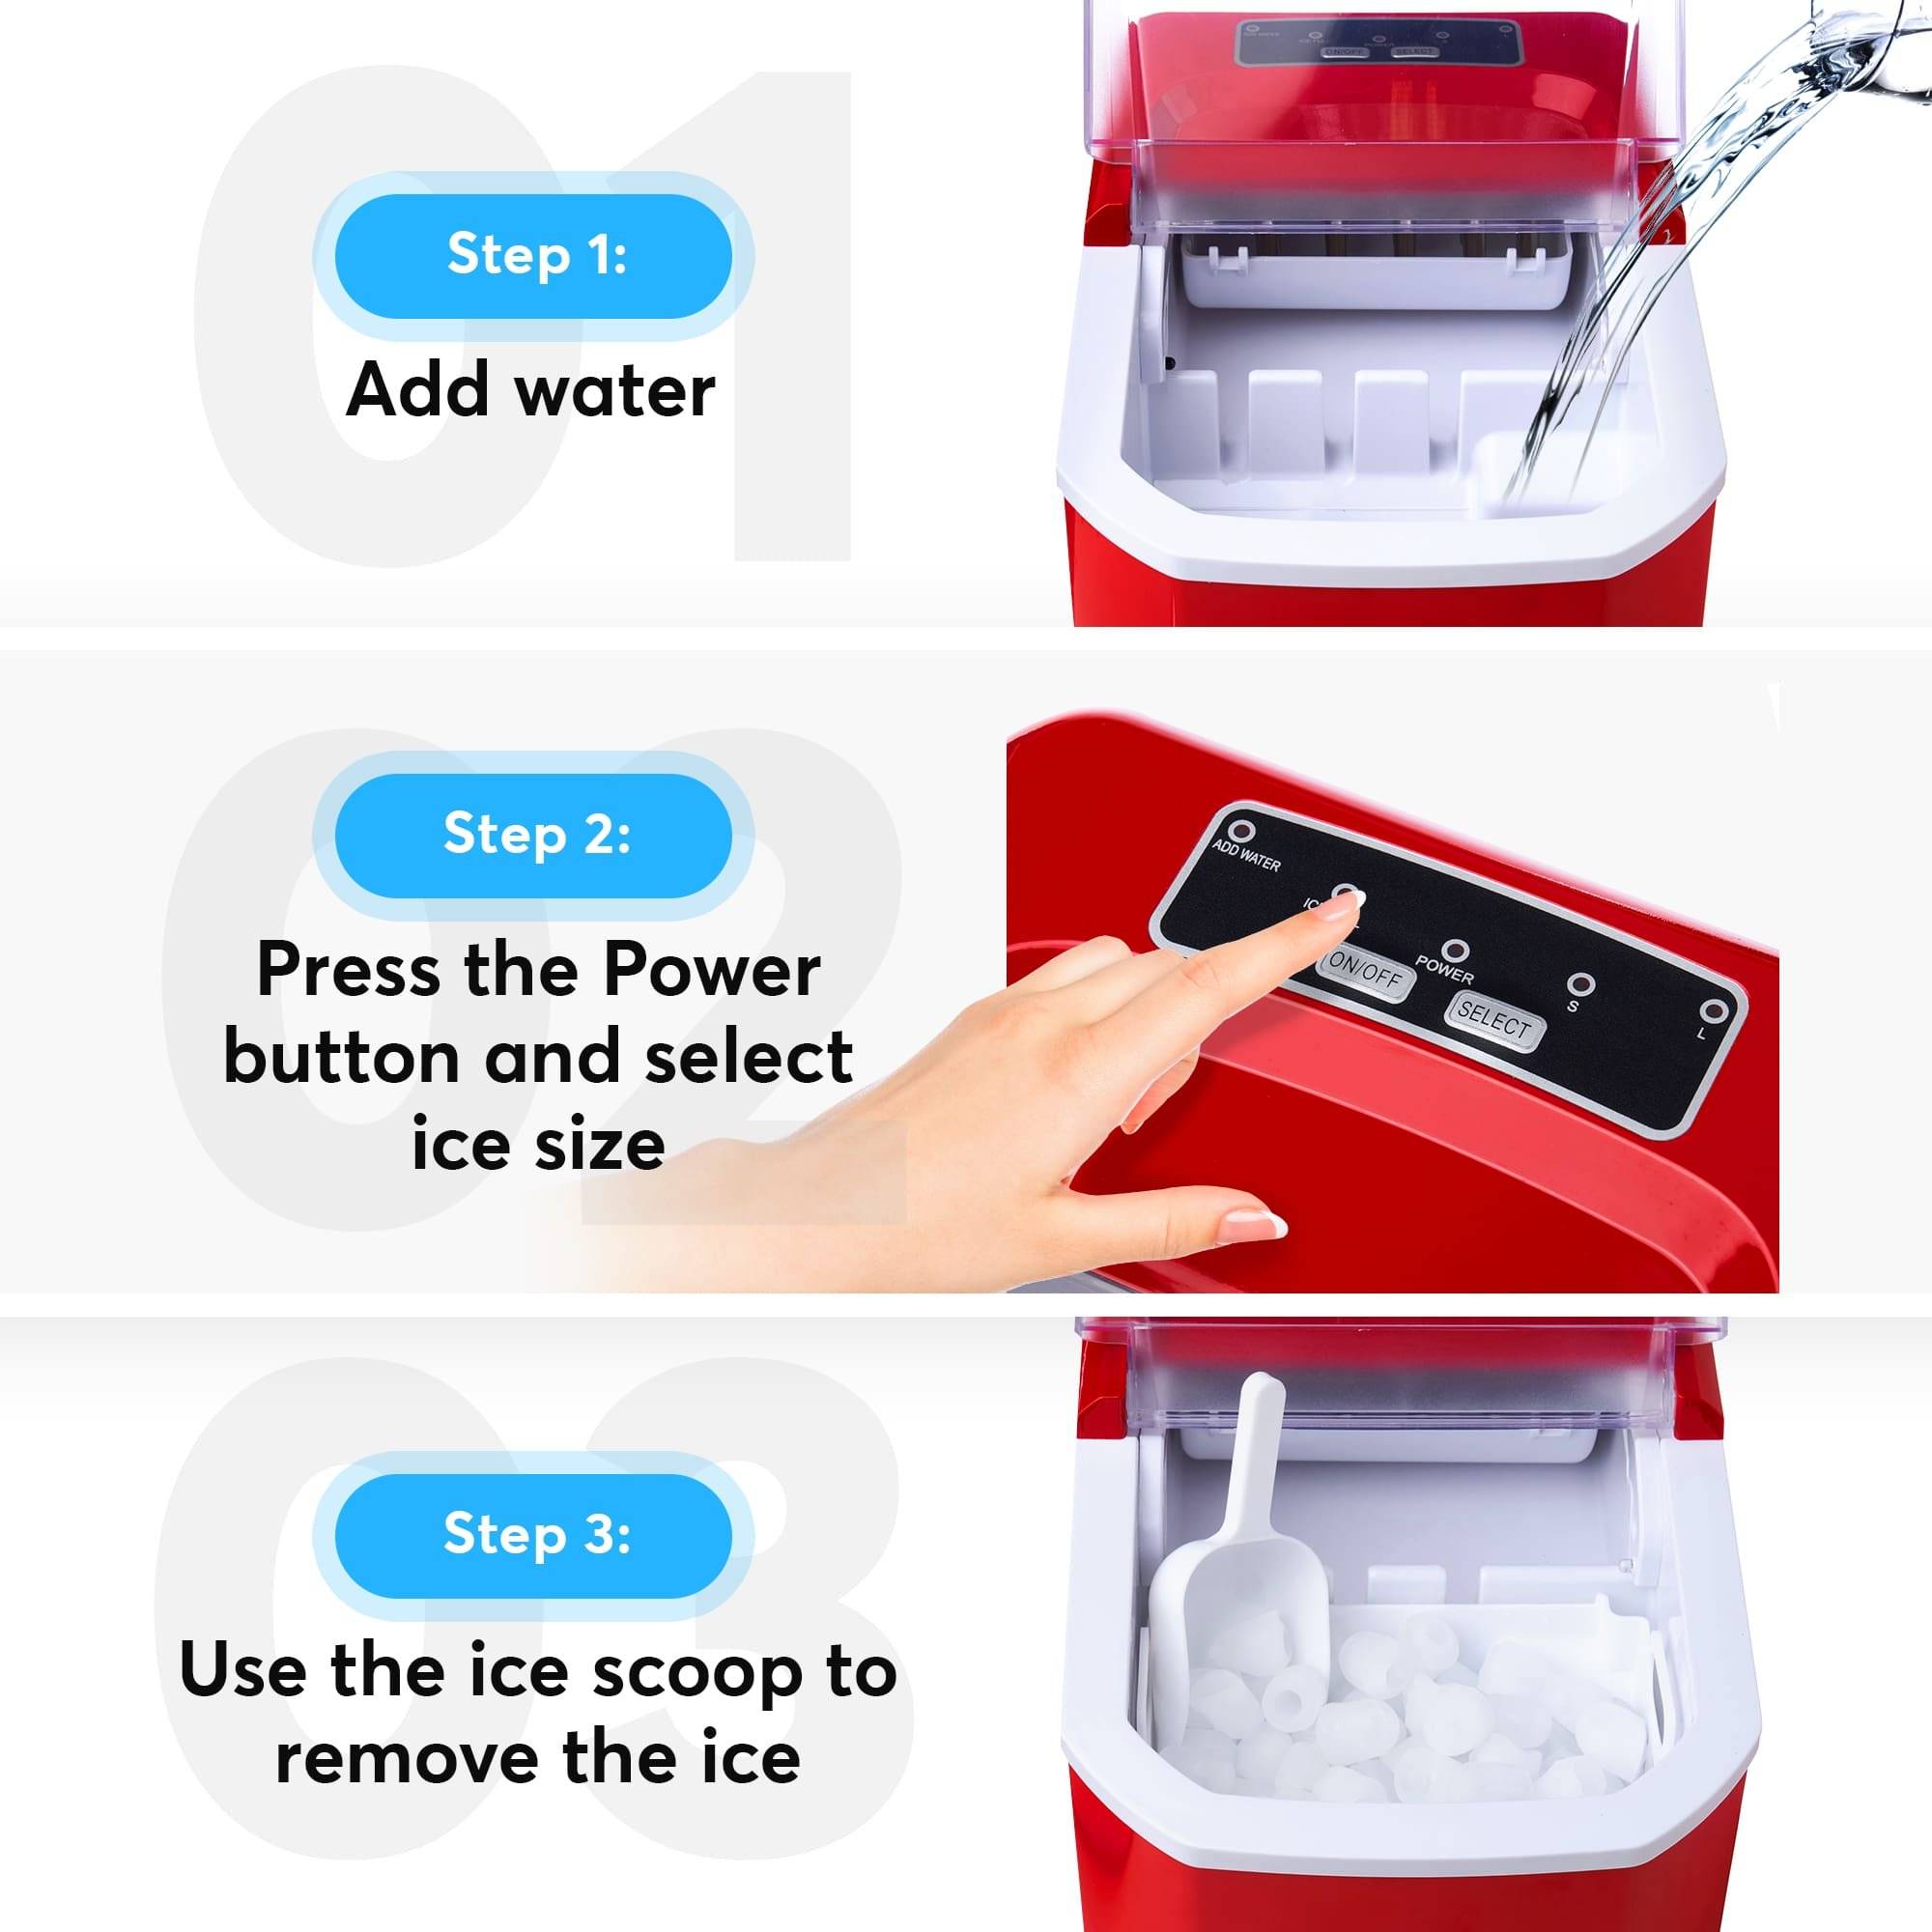 Ice Maker Countertop, 28 lbs Ice In 24 Hrs, 9 Ice Cubes Ready In 5